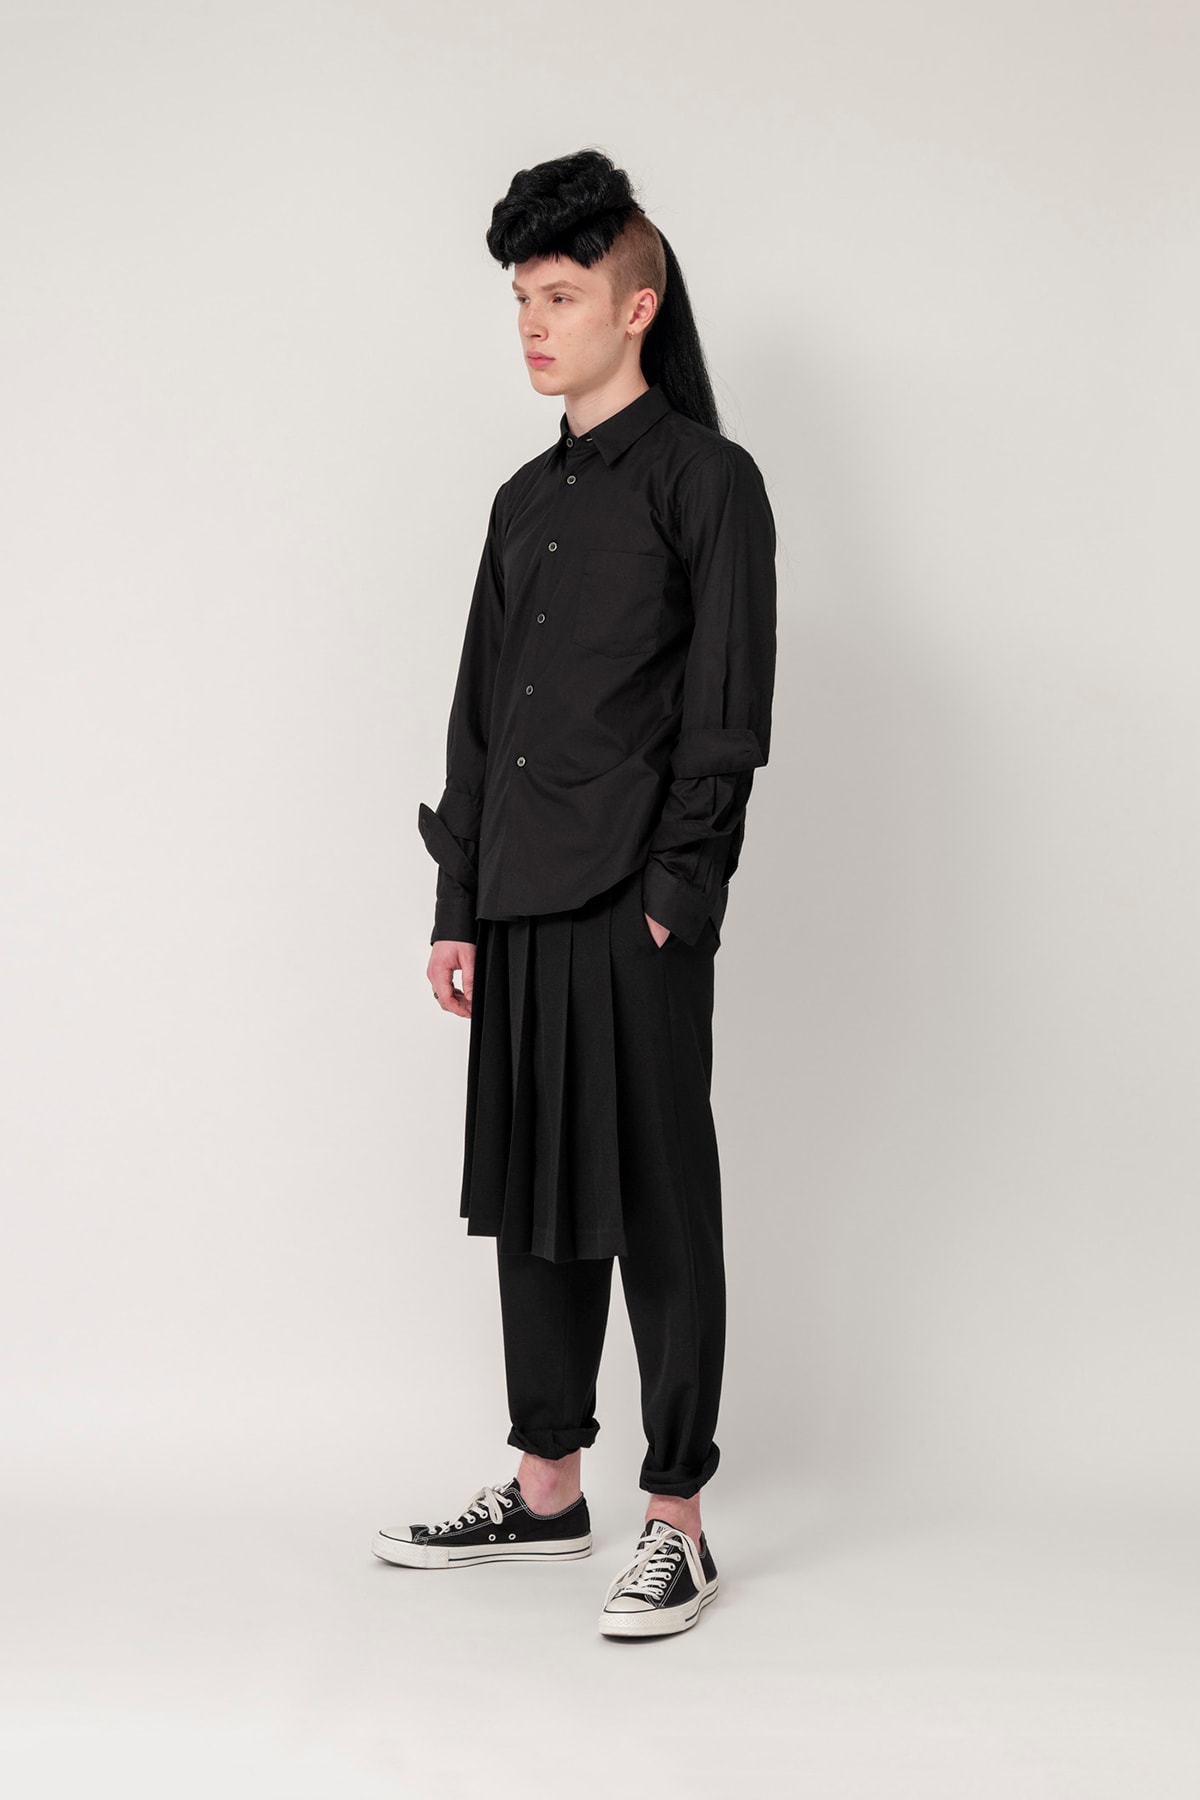 Nike x BLACK COMME des GARCONS Fall/Winter 2019 Collection Shirt Skirt Trousers Black Mens